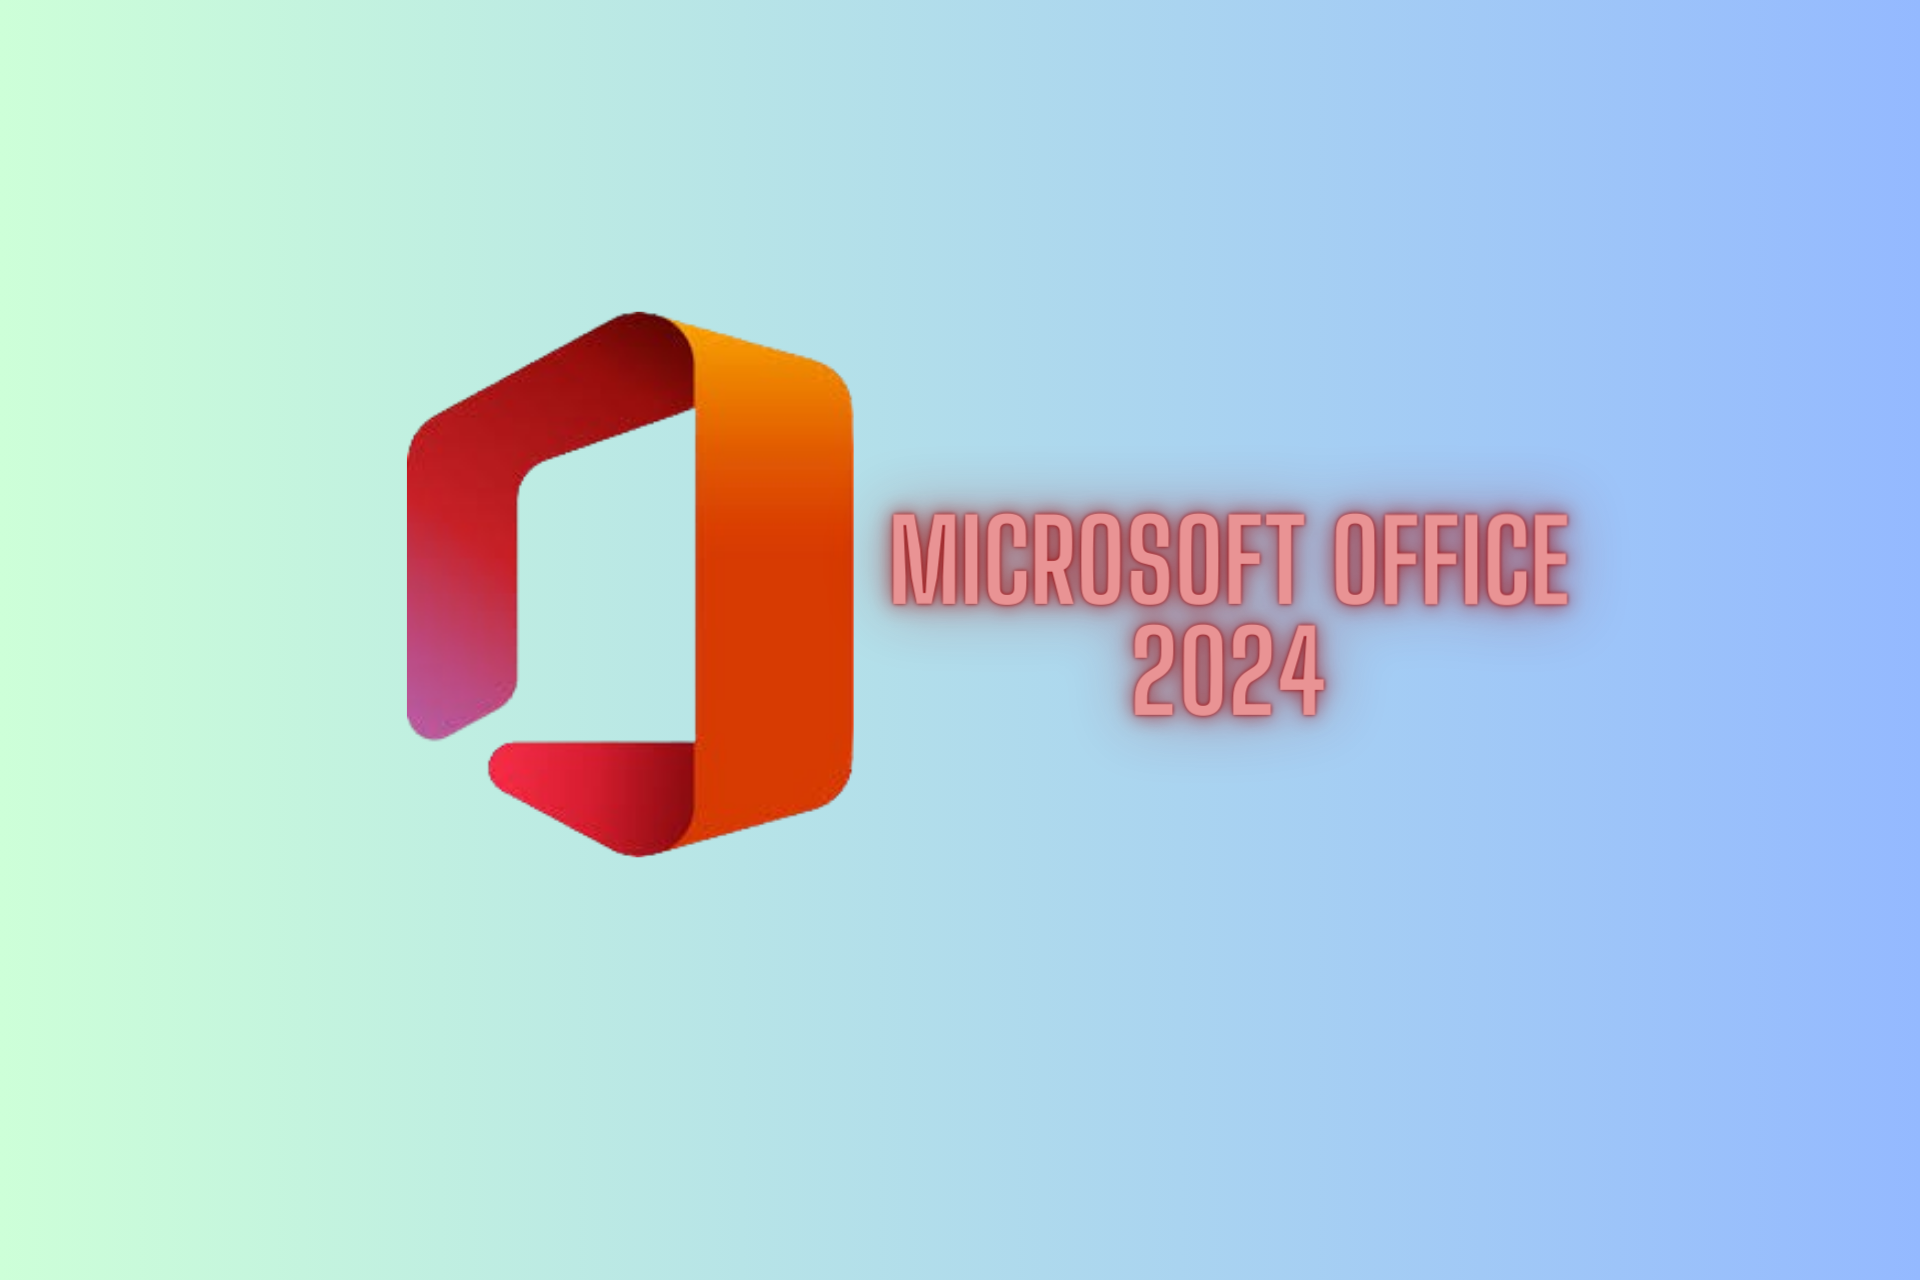 Microsoft Office 2024: Things we know so far